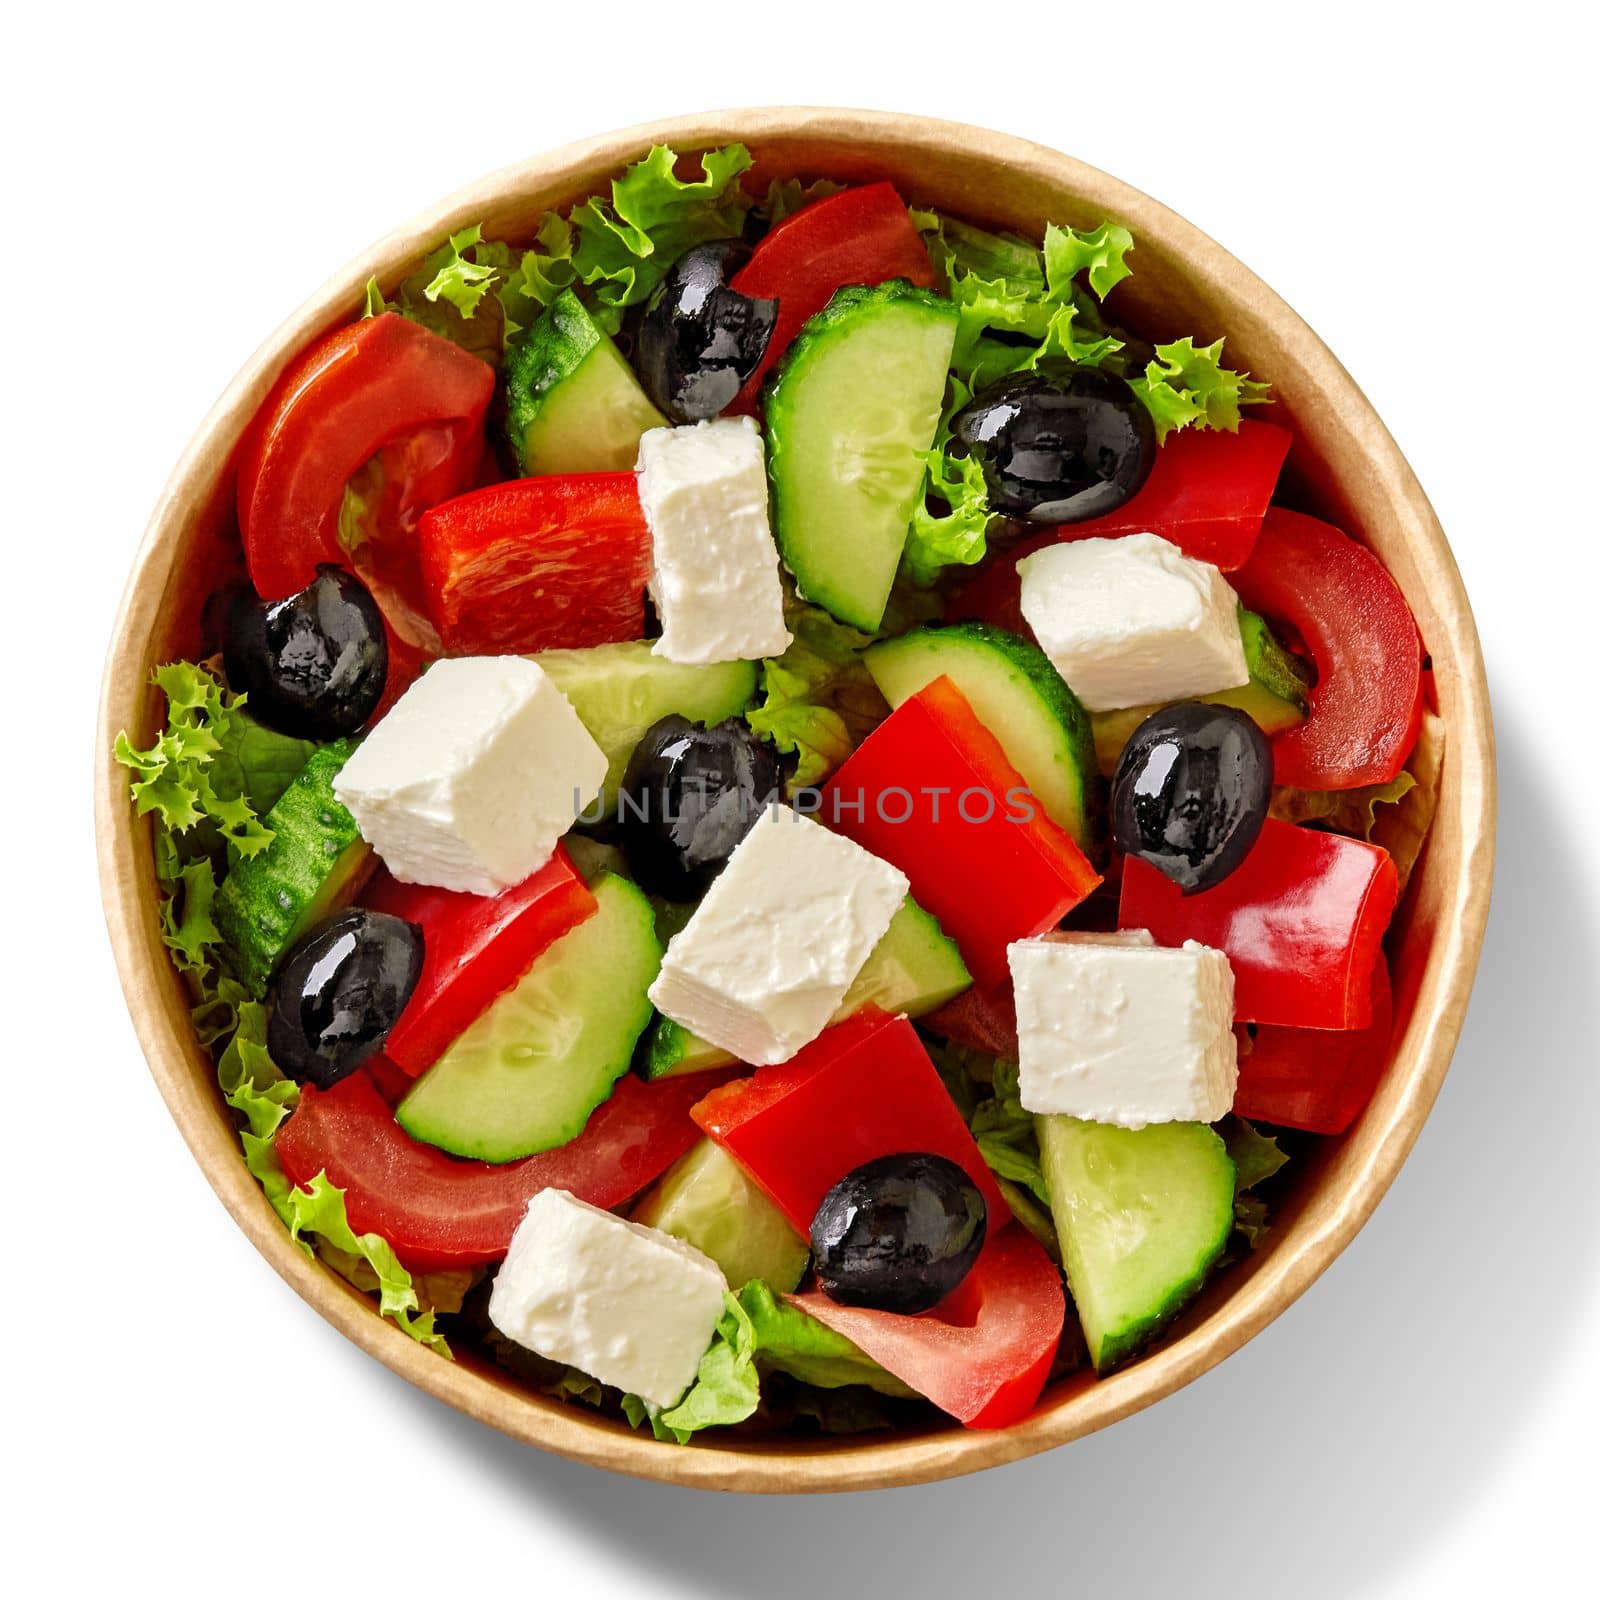 Fresh Greek salad with green lettuce, pieces of ripe tomatoes, sweet peppers, cucumbers, slightly salty creamy feta cheese and marinated black olives served in cardboard bowl. Healthy takeaway food